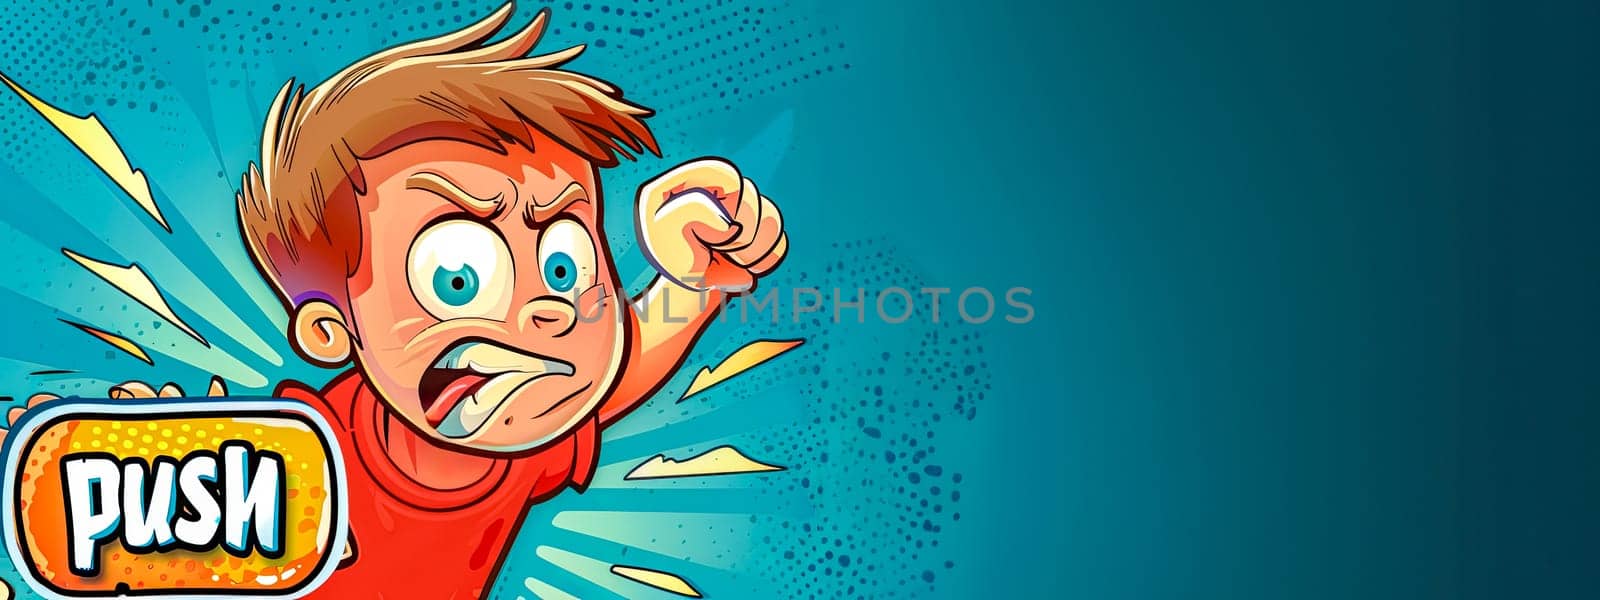 Cartoon boy running and pushing button action scene by Edophoto